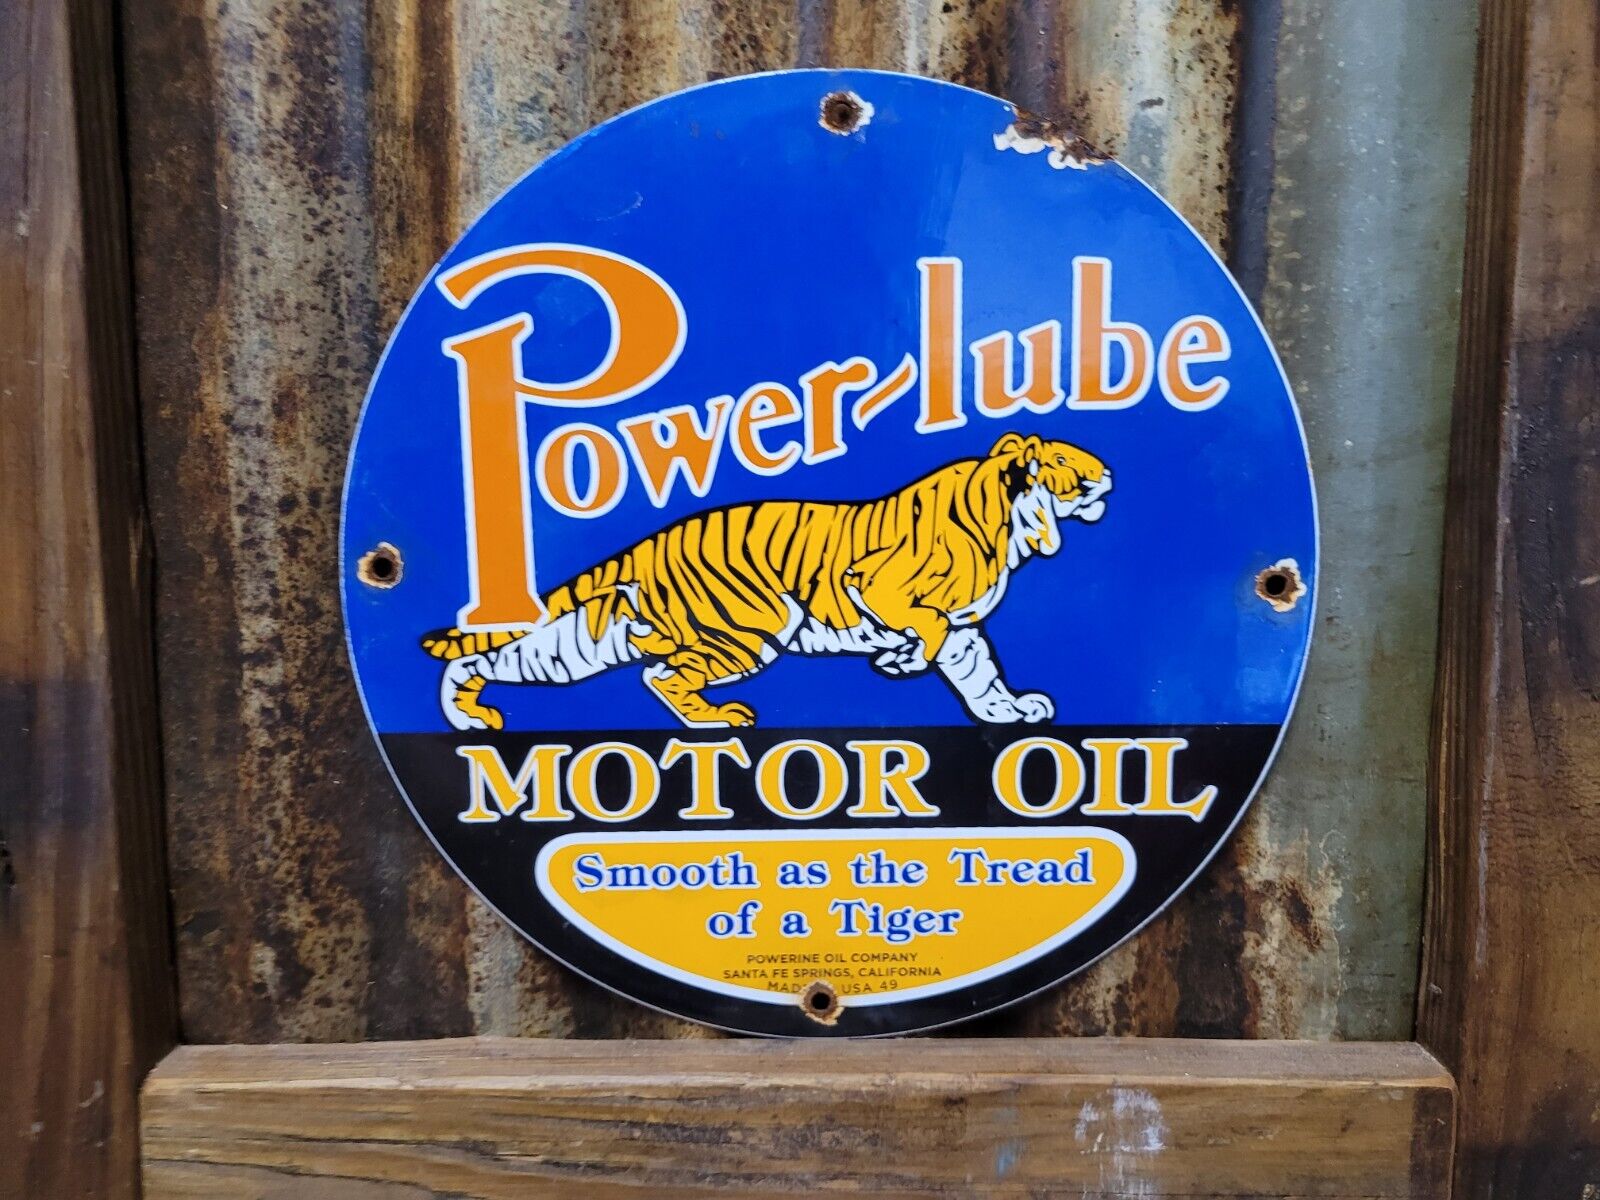 VINTAGE POWER LUBE PORCELAIN SIGN 1949 POWERLINE TIGER GAS OIL CLAIFORNIA LUBE